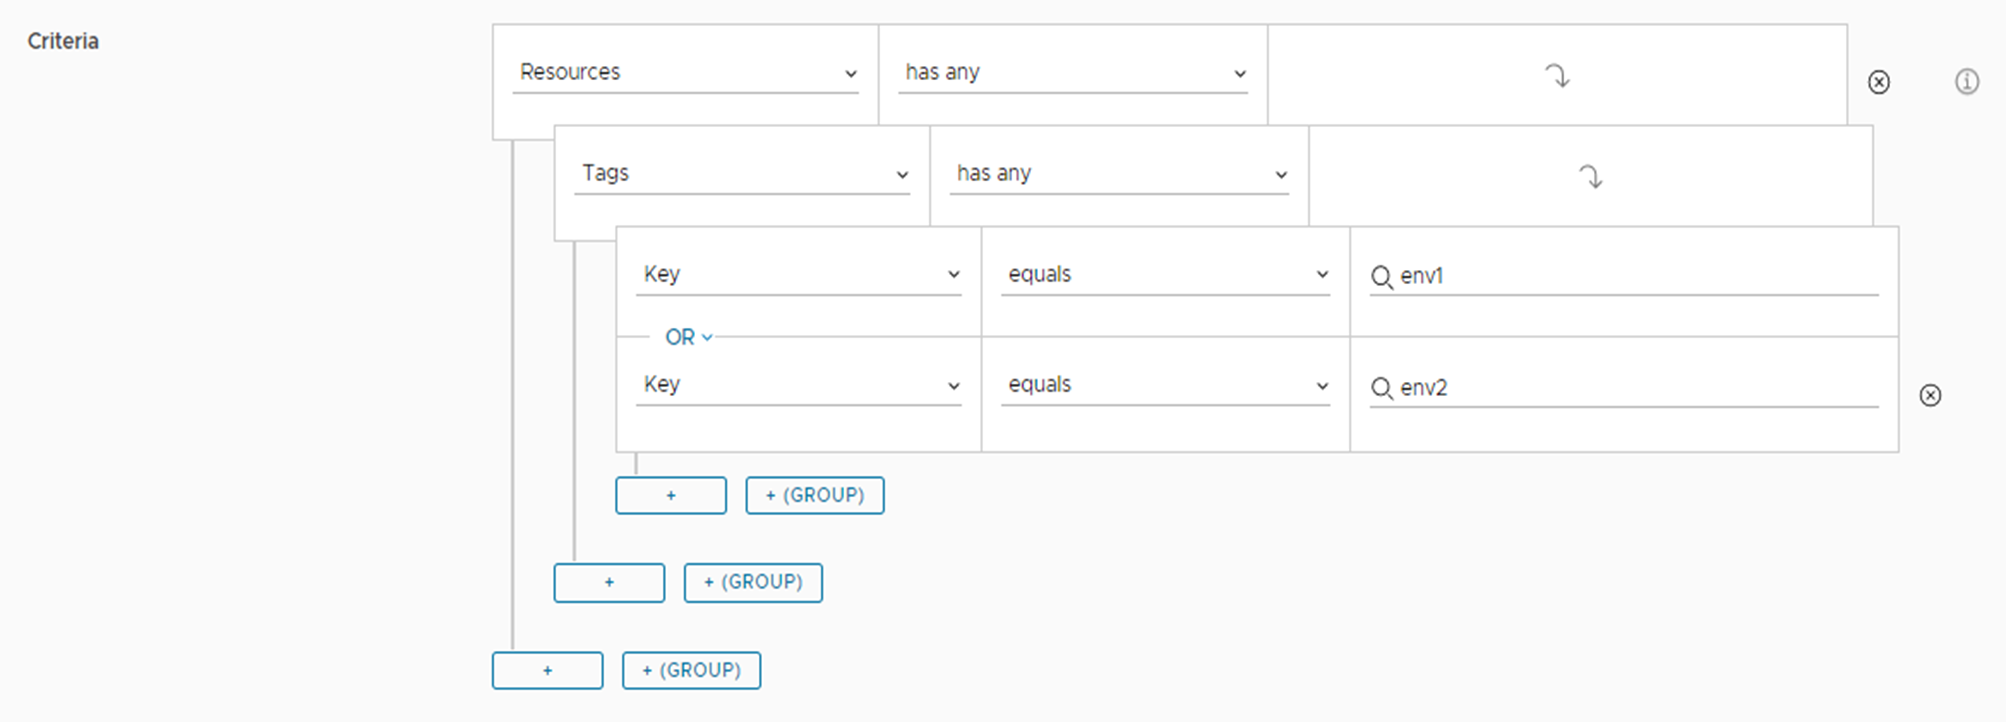 Example of the multiple keys deployment criteria expression as it appears in the UI.